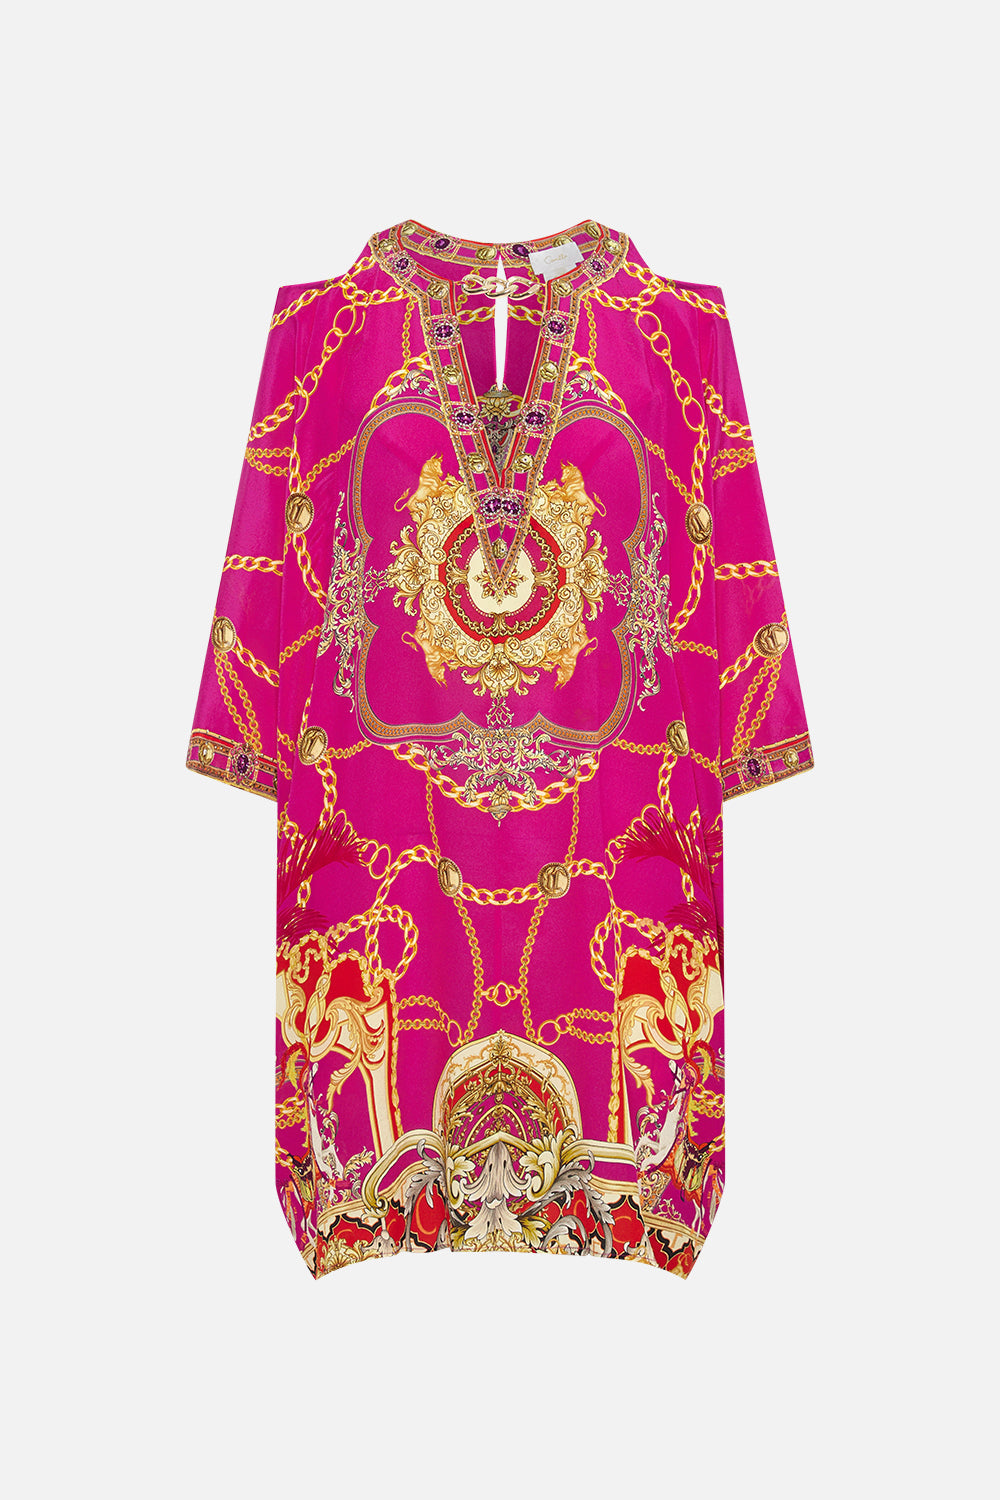 Front product view of CAMILLA pink silk kaftan in Wild And Running print 